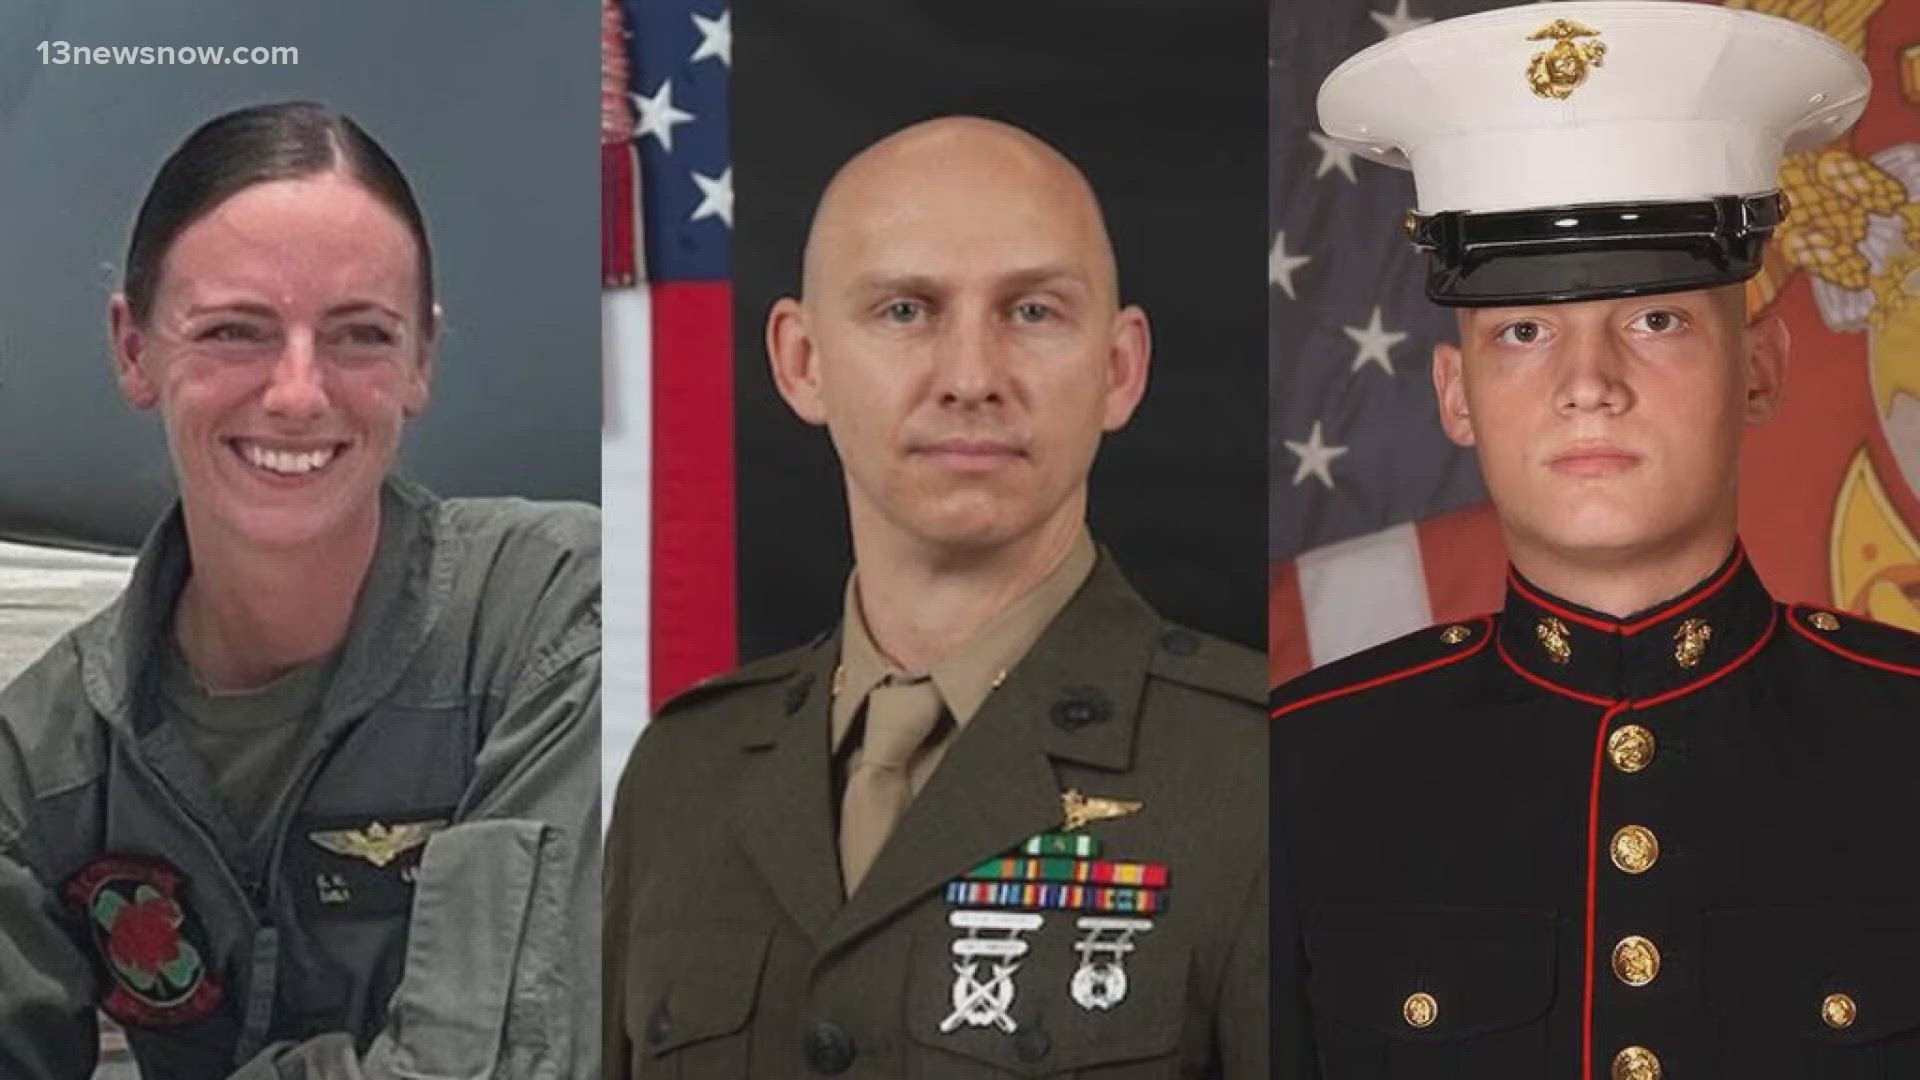 With two aviation mishaps and four fatalities, it's been a tough and tragic stretch for the Marine Corps.